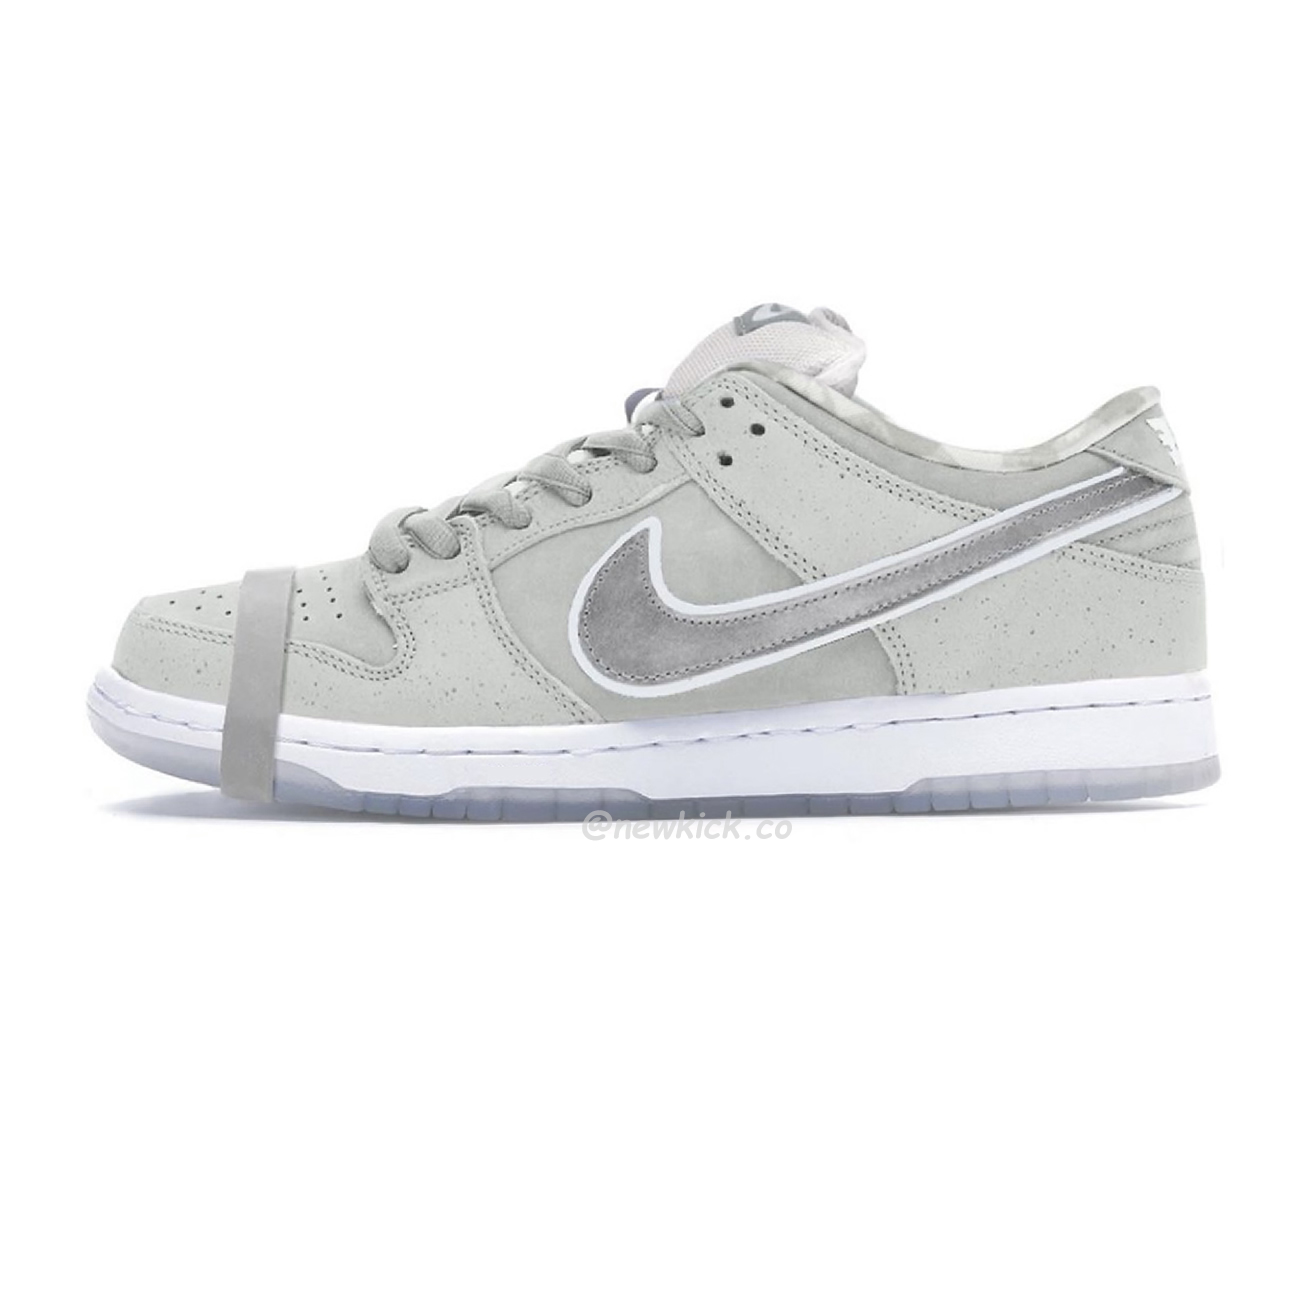 Nike Sb Dunk Low White Lobster Friends And Family Fd8776 100 (1) - newkick.org